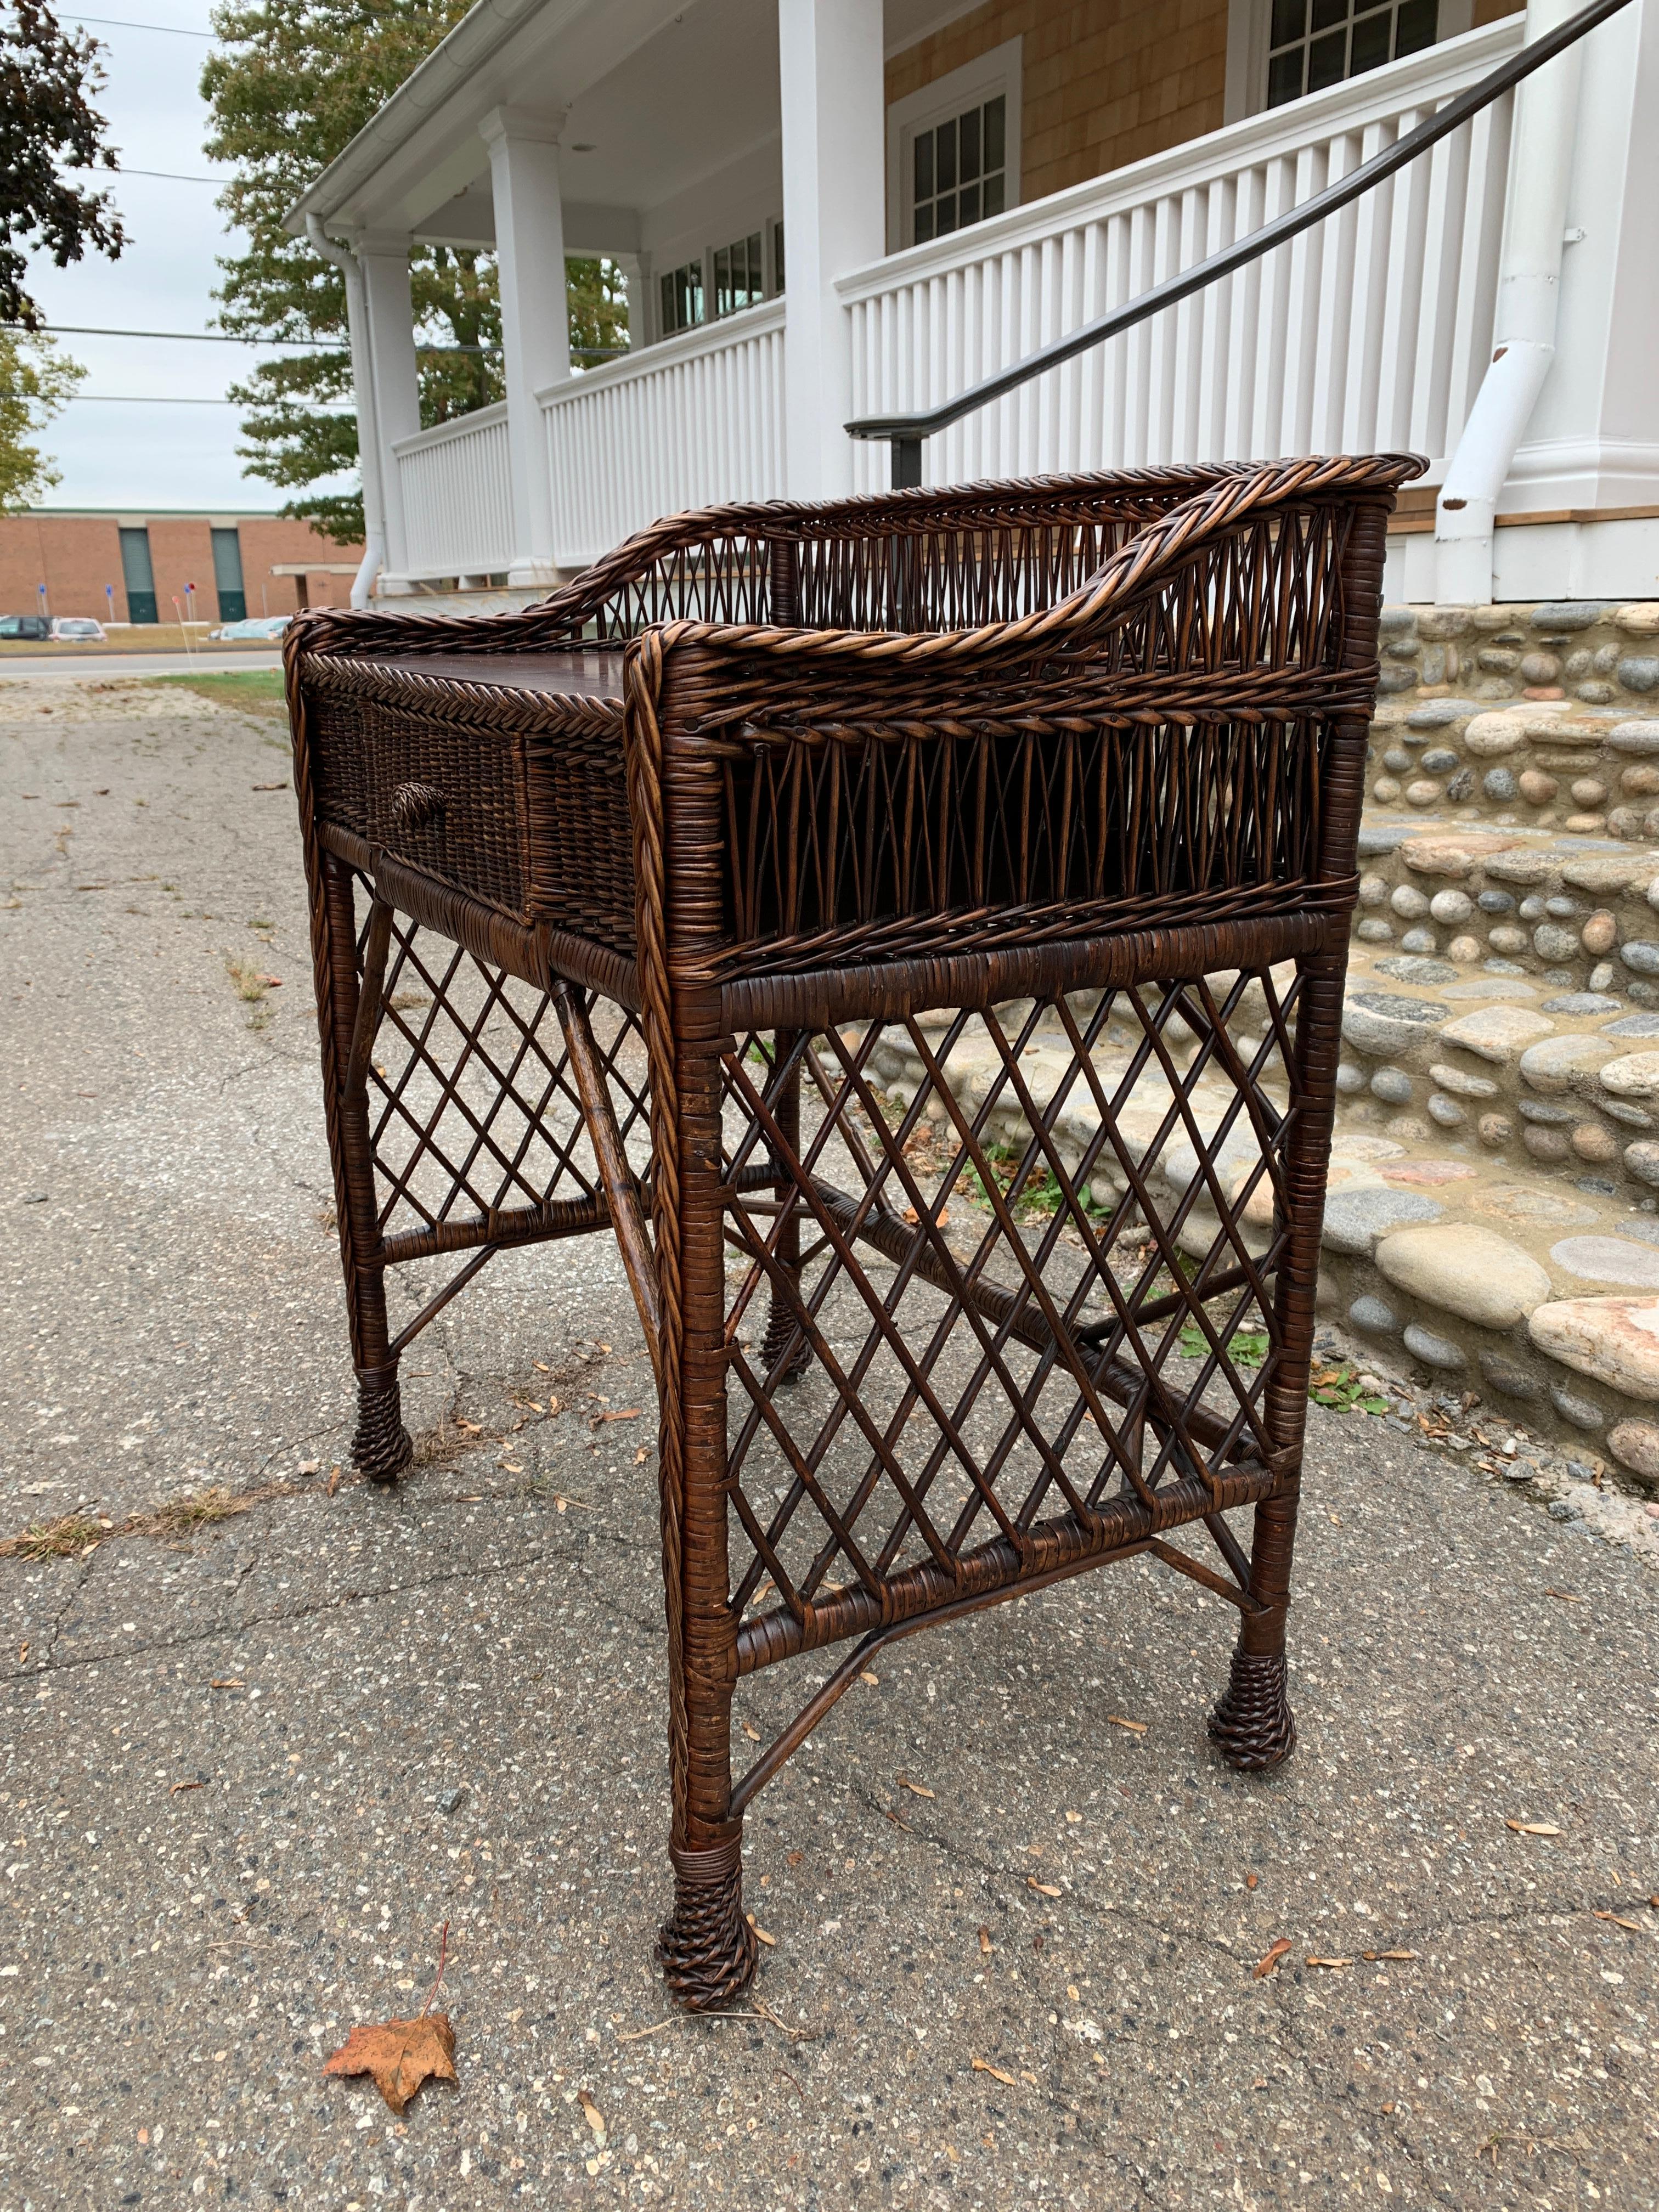 Hand-Woven Antique Willow Desk and Chair